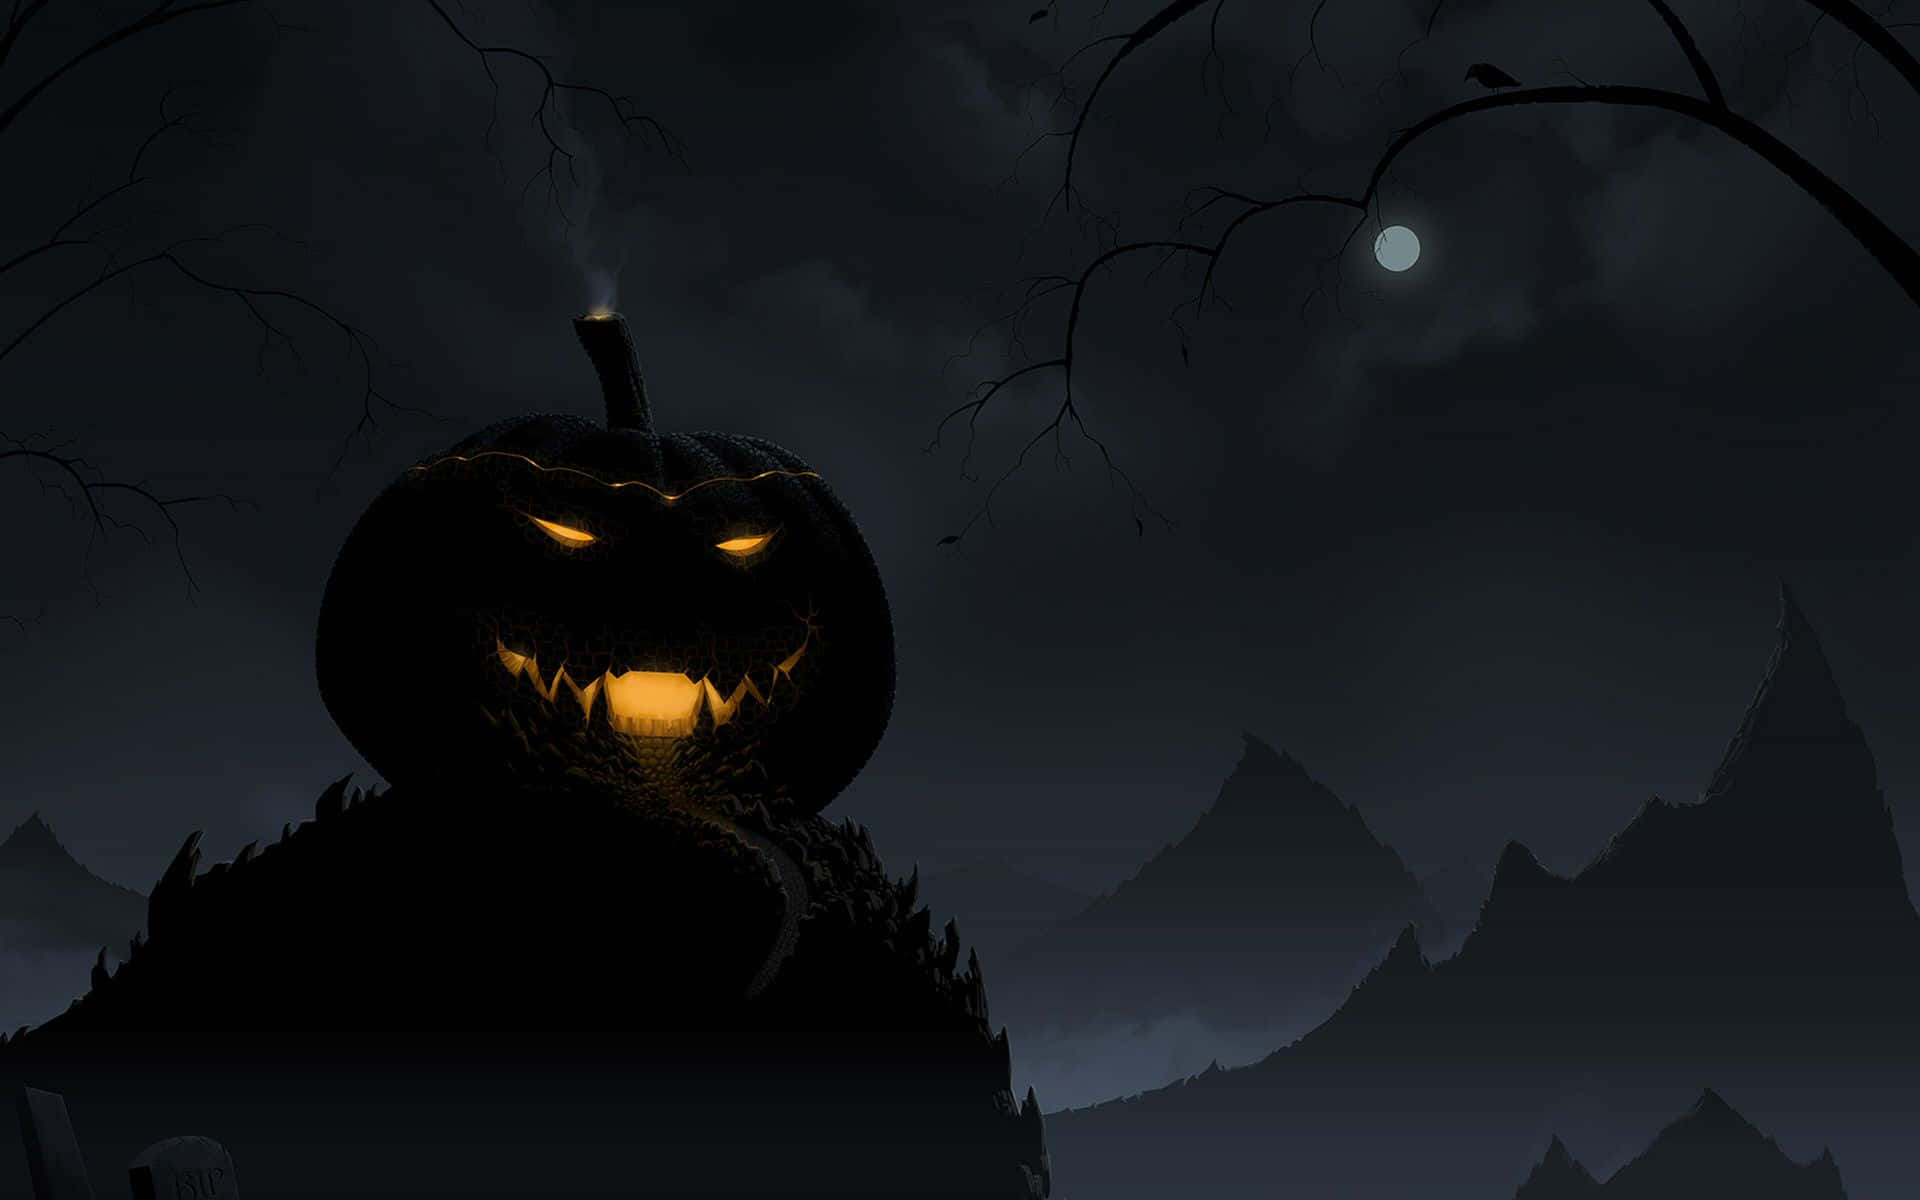 A scary Halloween desktop scene, with a pumpkin and a glowing green witch's hat. Wallpaper